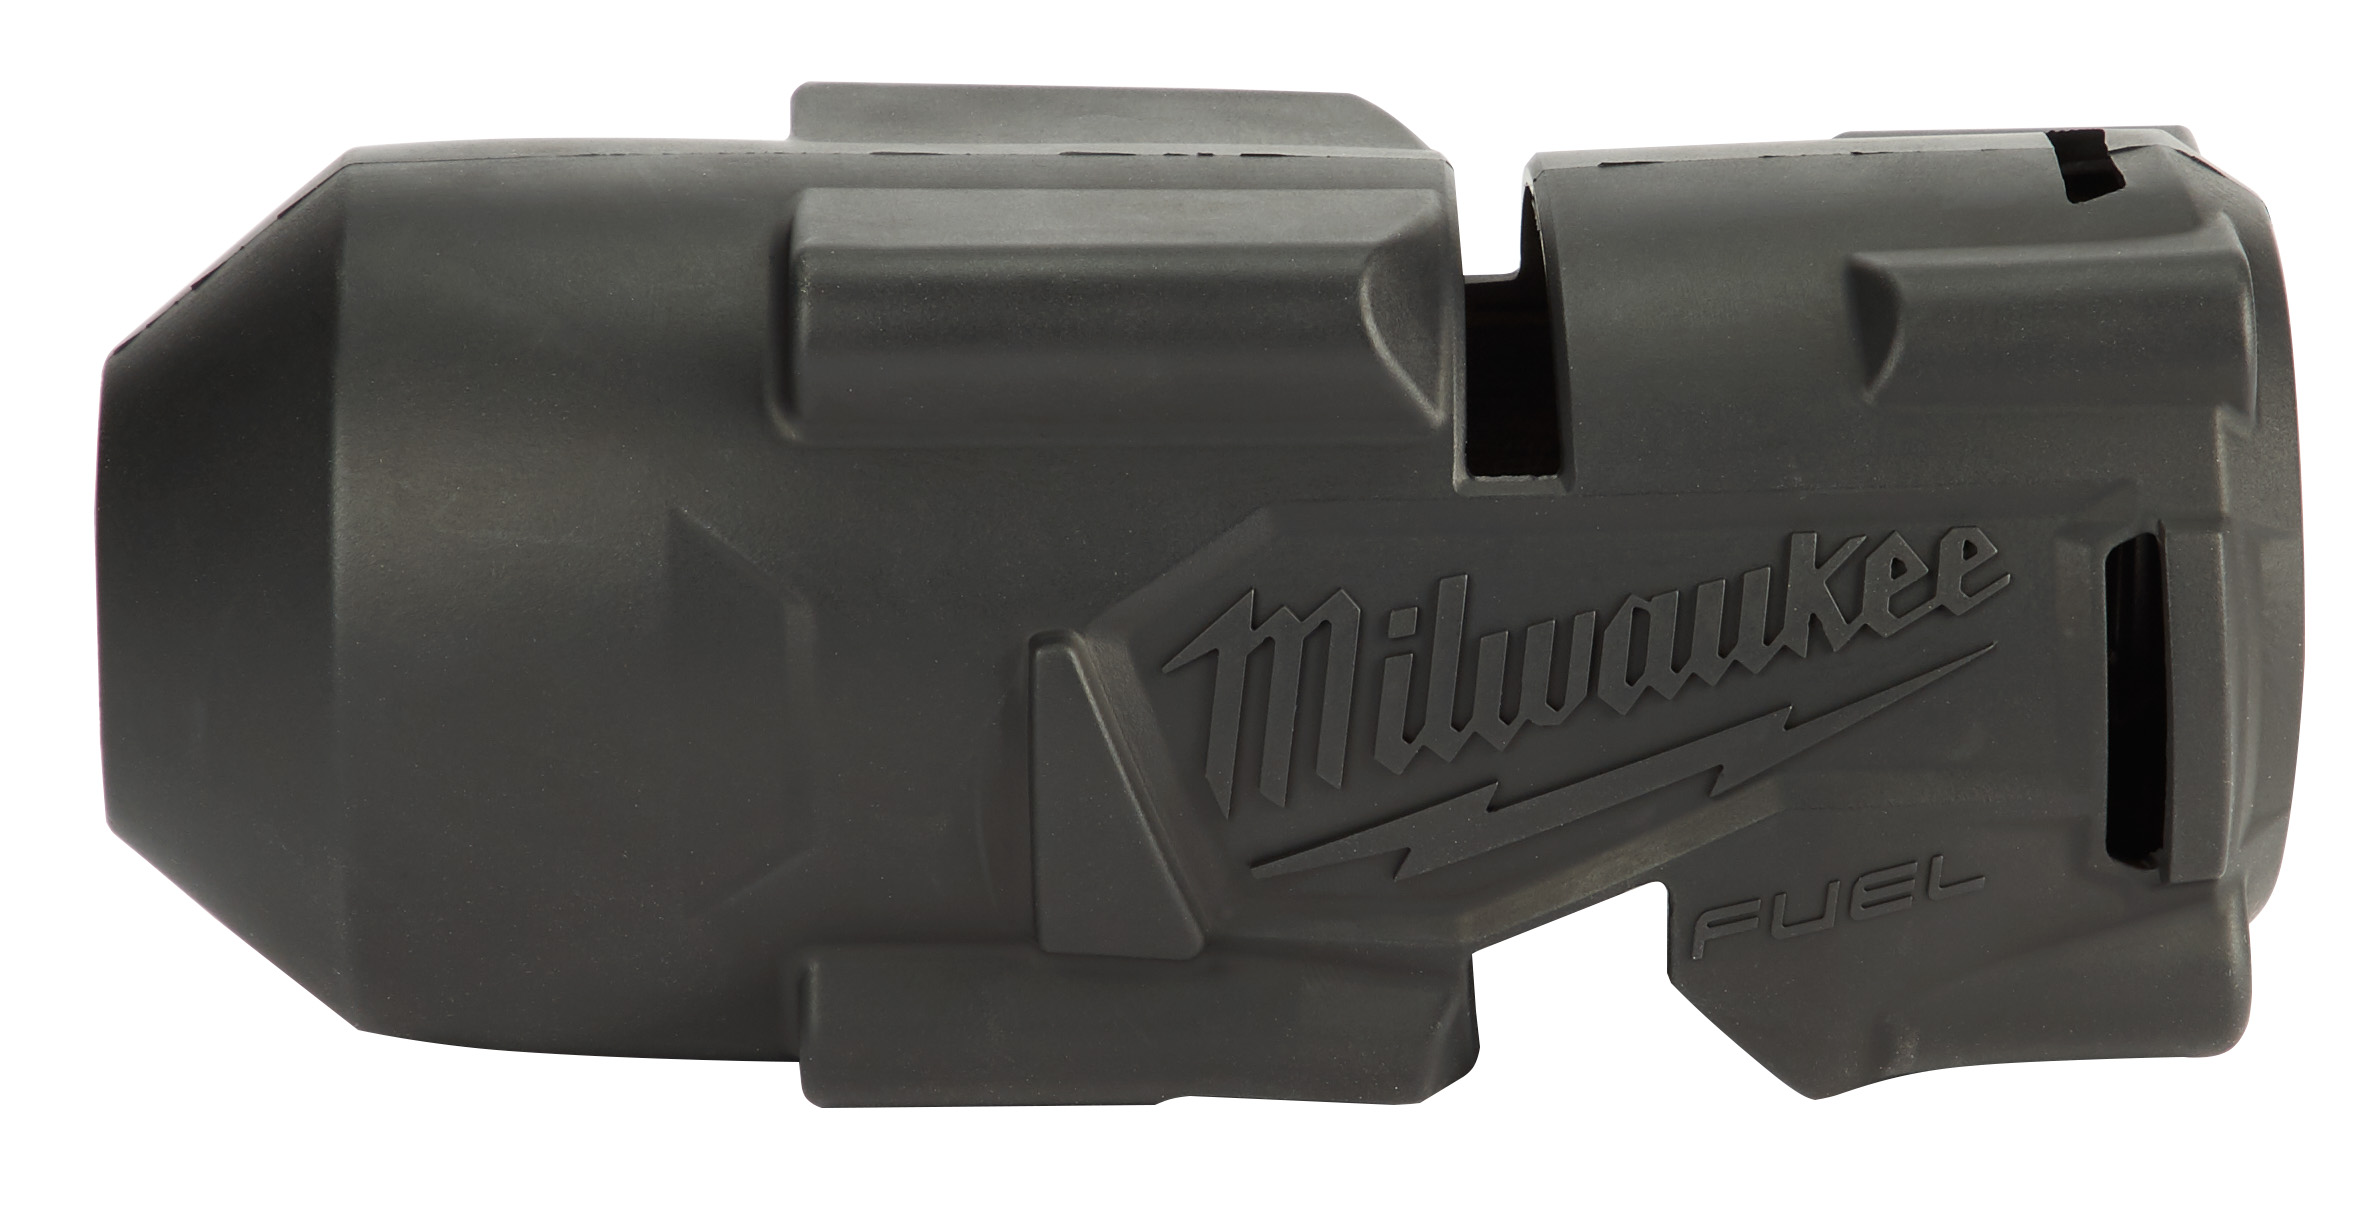 49-16-2766 045242506415 The Milwaukee 49-16-2766 tool boot is for use with the M18 FUEL™ high torque impact wrench (2766-20 & 2862-20) only. This product provides a lightweight, durable solution that is meant to protect the tool and work surface. A durable rubber design will withstand corrosive materials commonly found in maintenance environments. Not for use on or near live electrical circuits. Use on any other product may result in damage to tool motor and may void tool warranty.